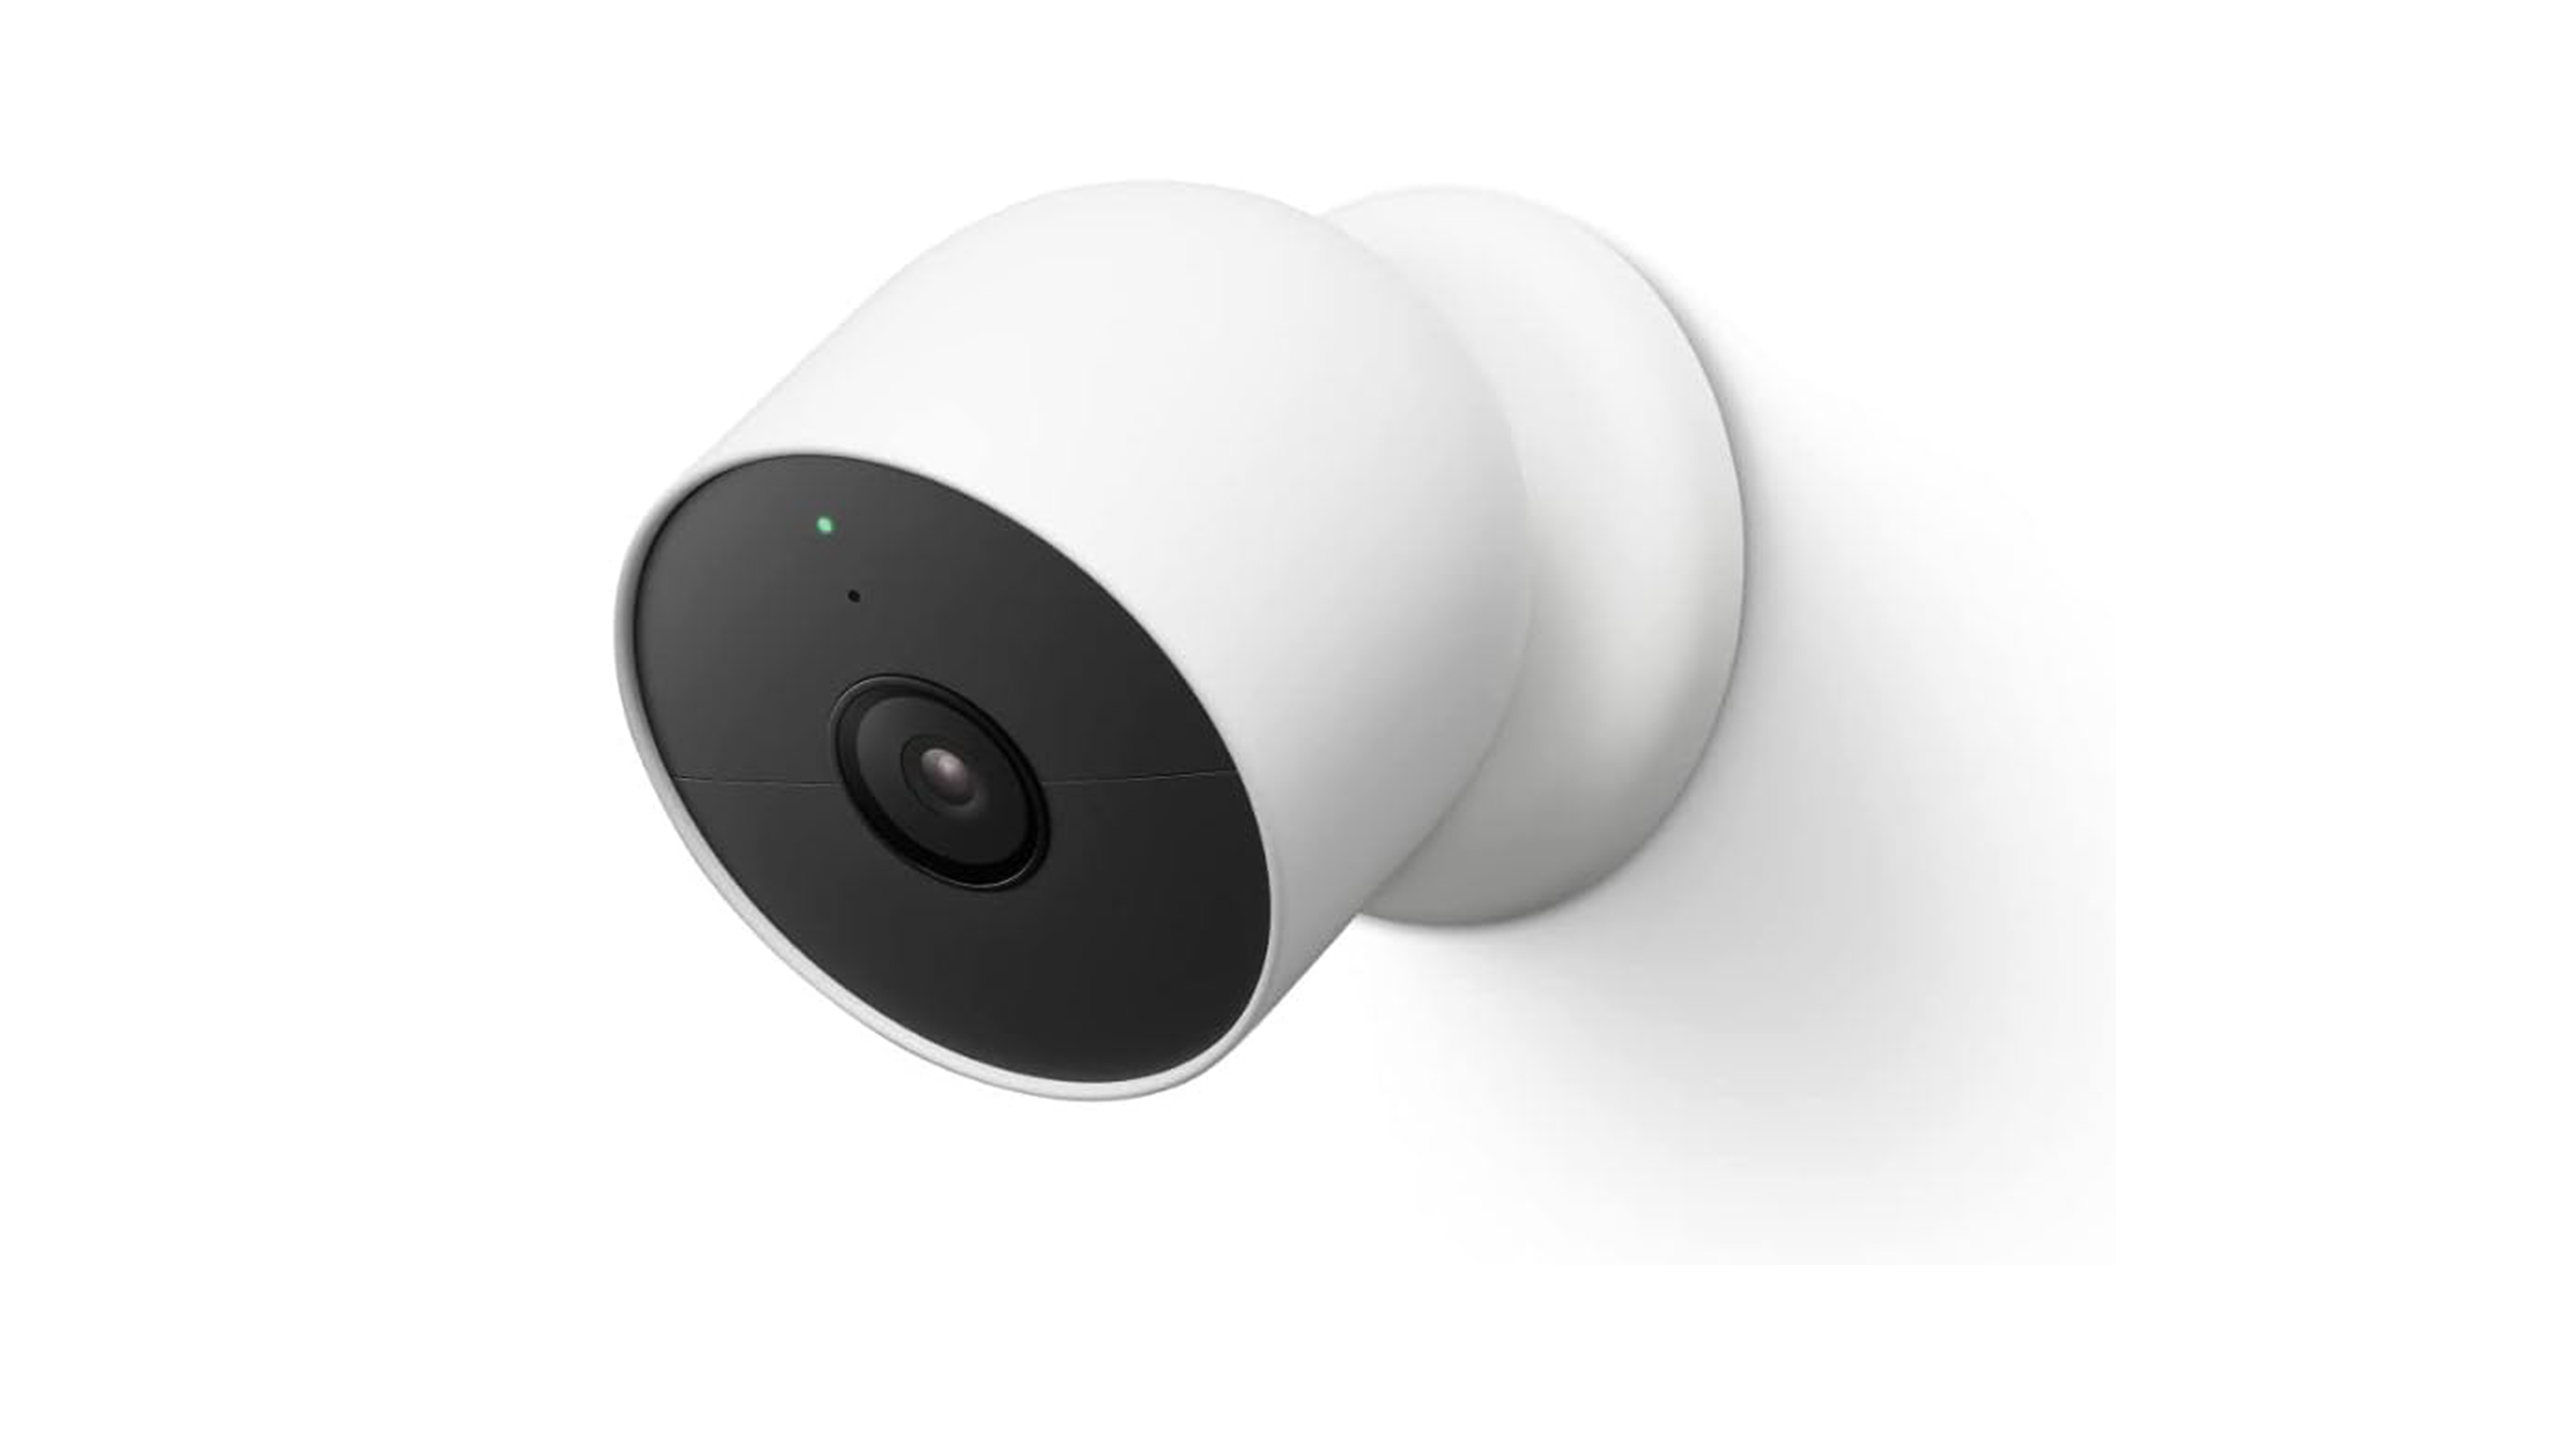 Google Nest Cam (Outdoor or Indoor, Battery) on white background